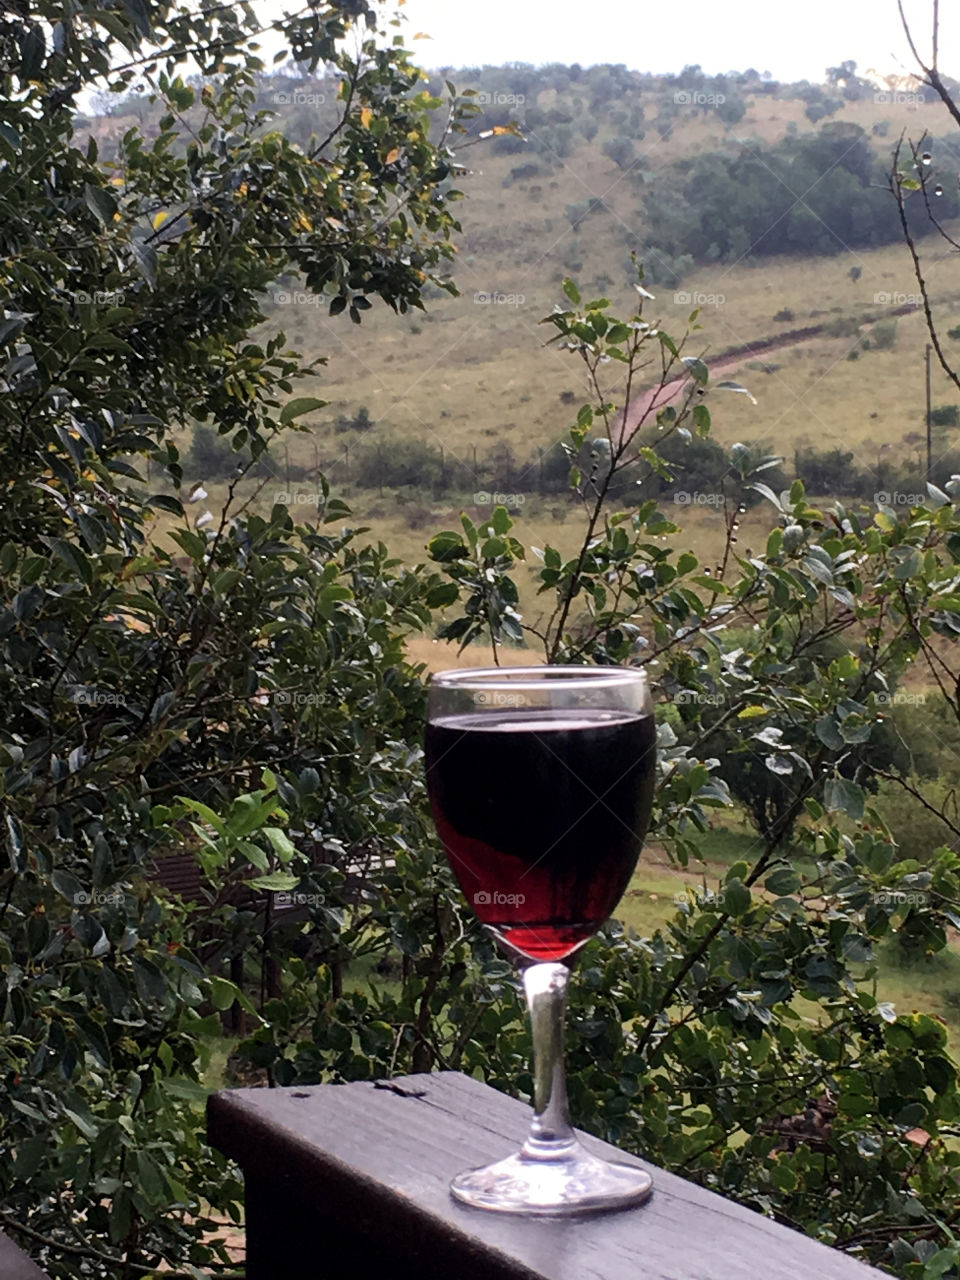 Red wine with a view